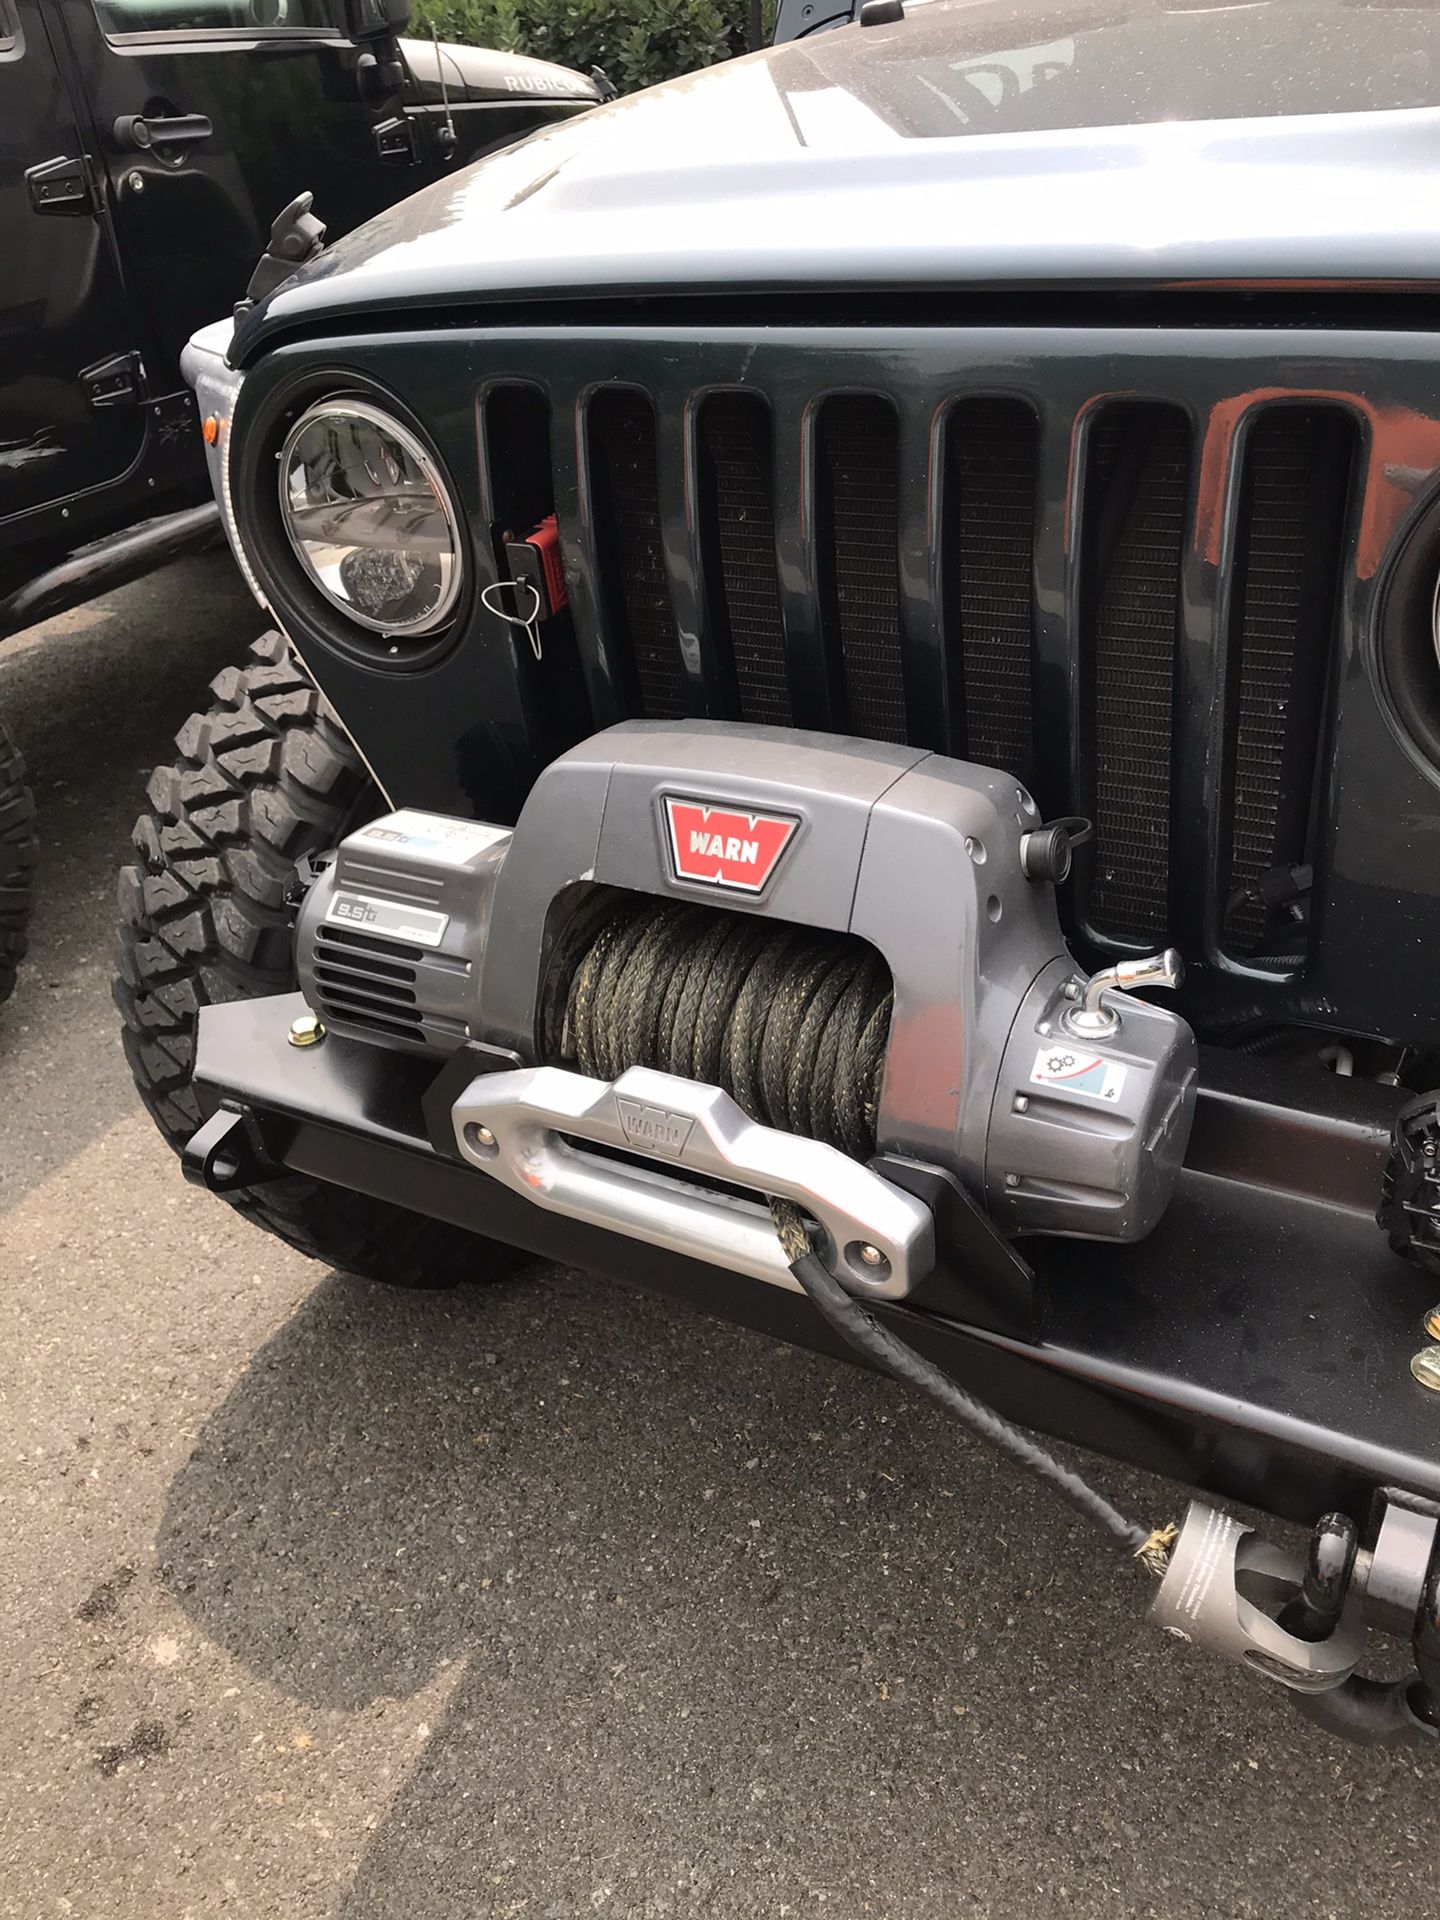 Warn 9.5 CTI winch with ORO x-line synthetic winch rope